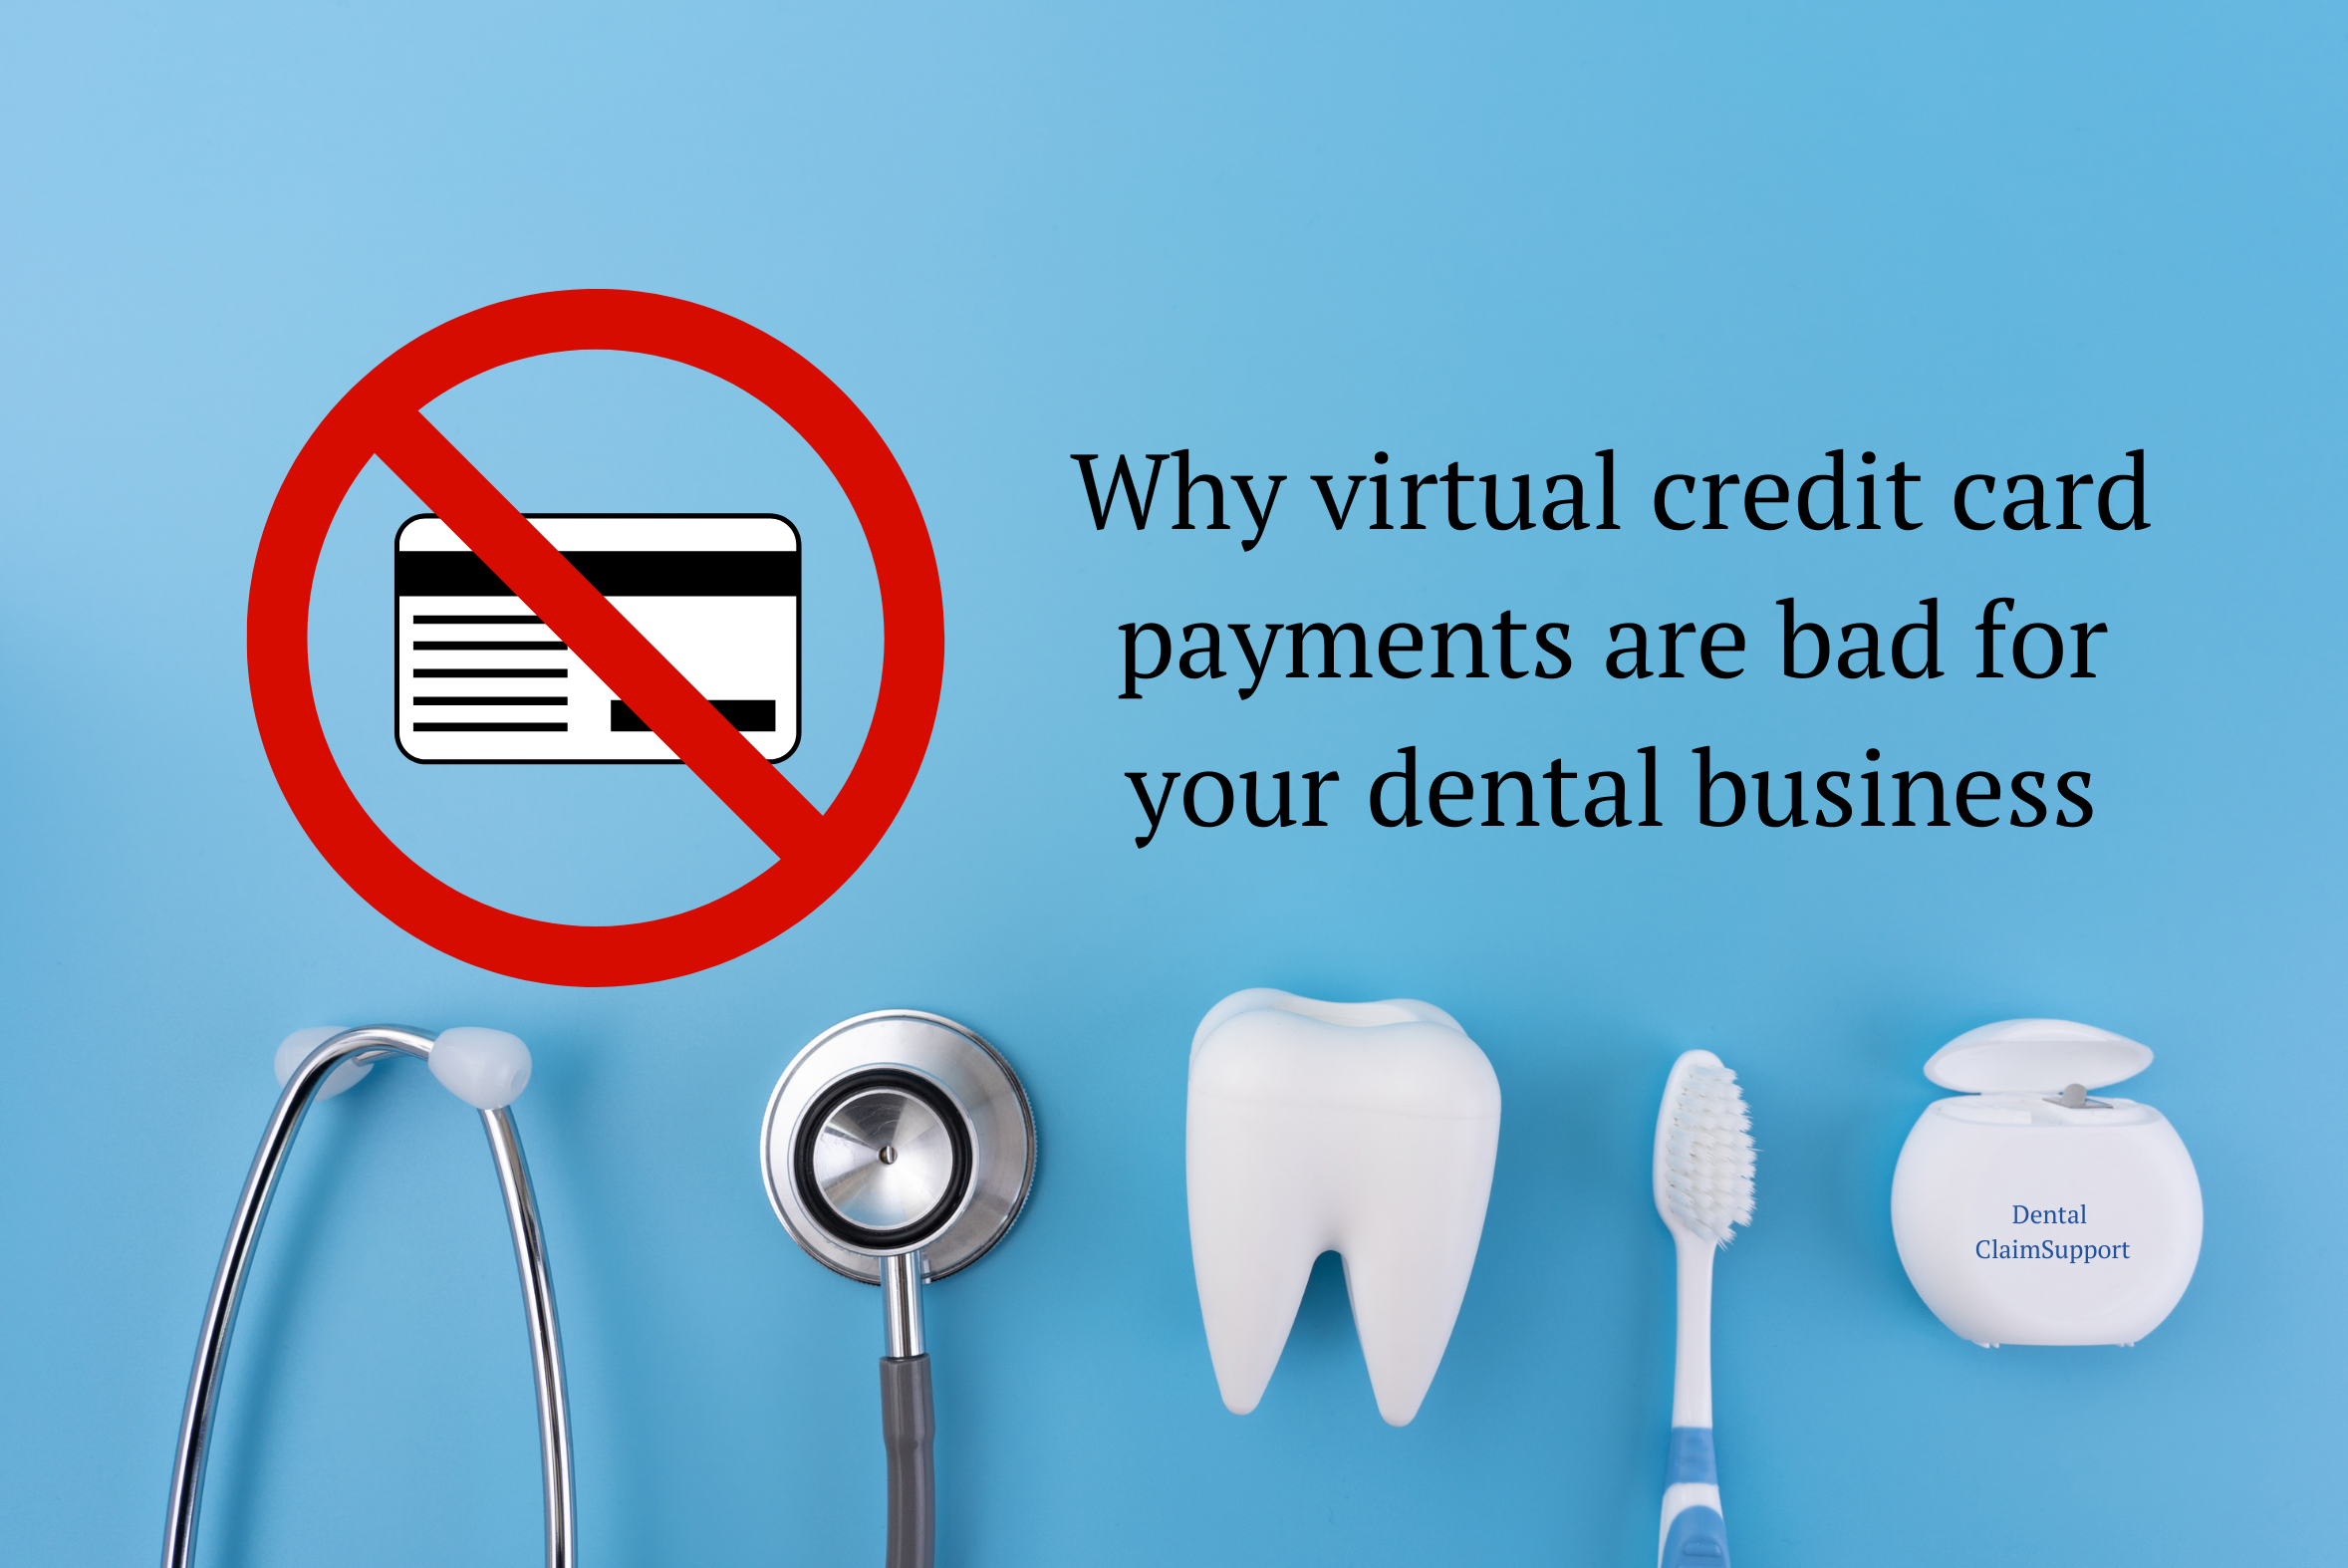 3 problems you'll see at the dental practice with virtual card payments